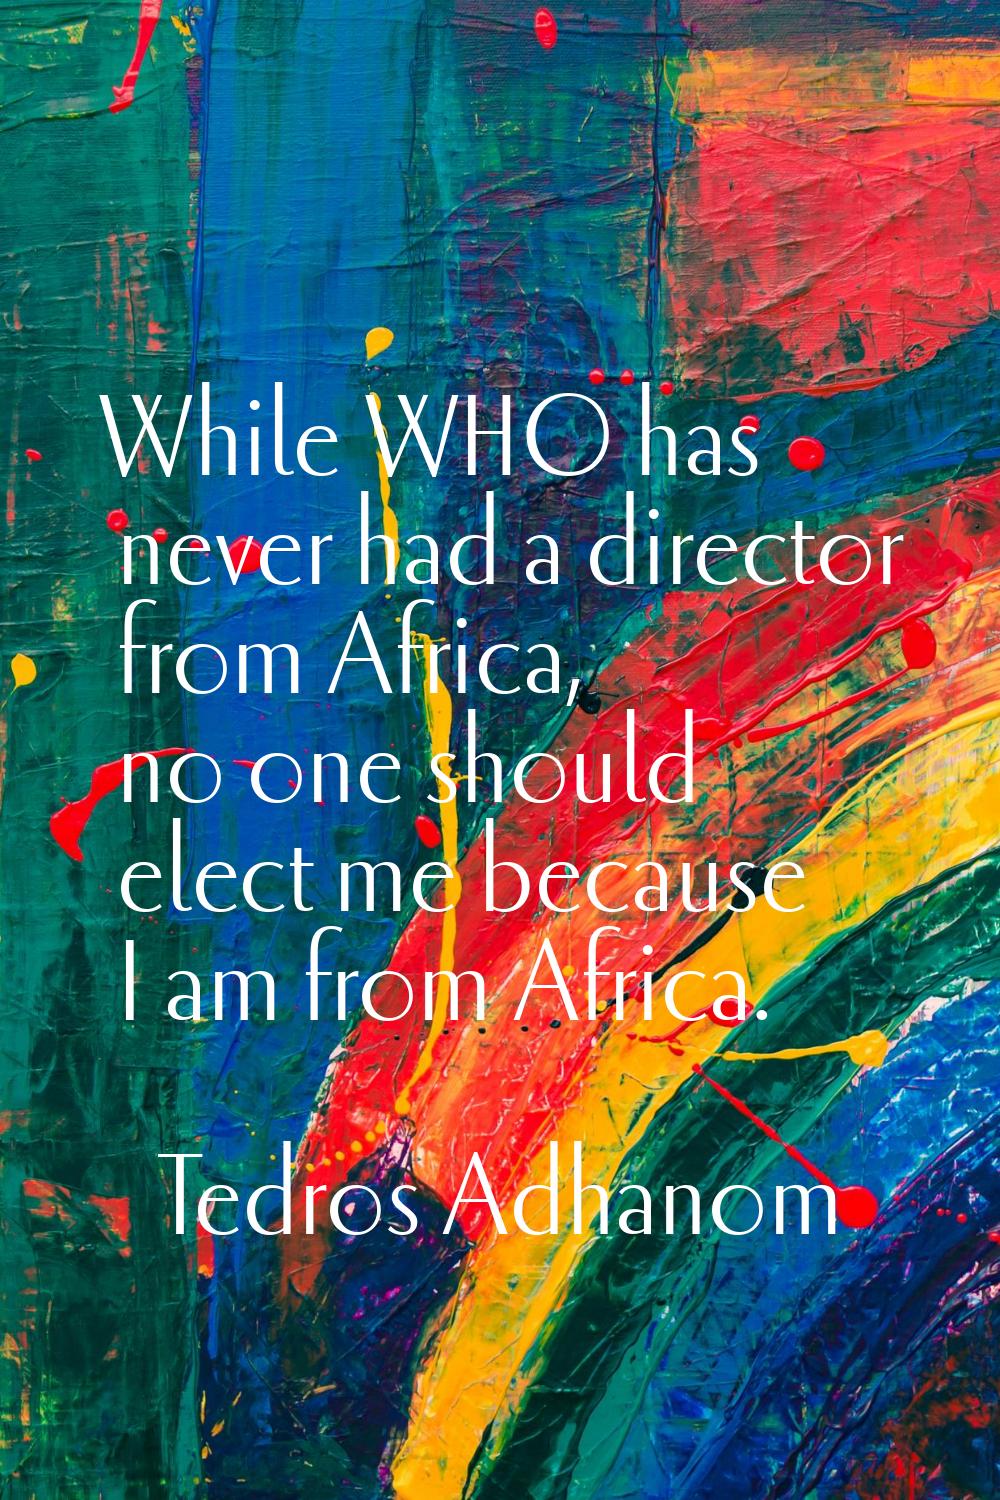 While WHO has never had a director from Africa, no one should elect me because I am from Africa.